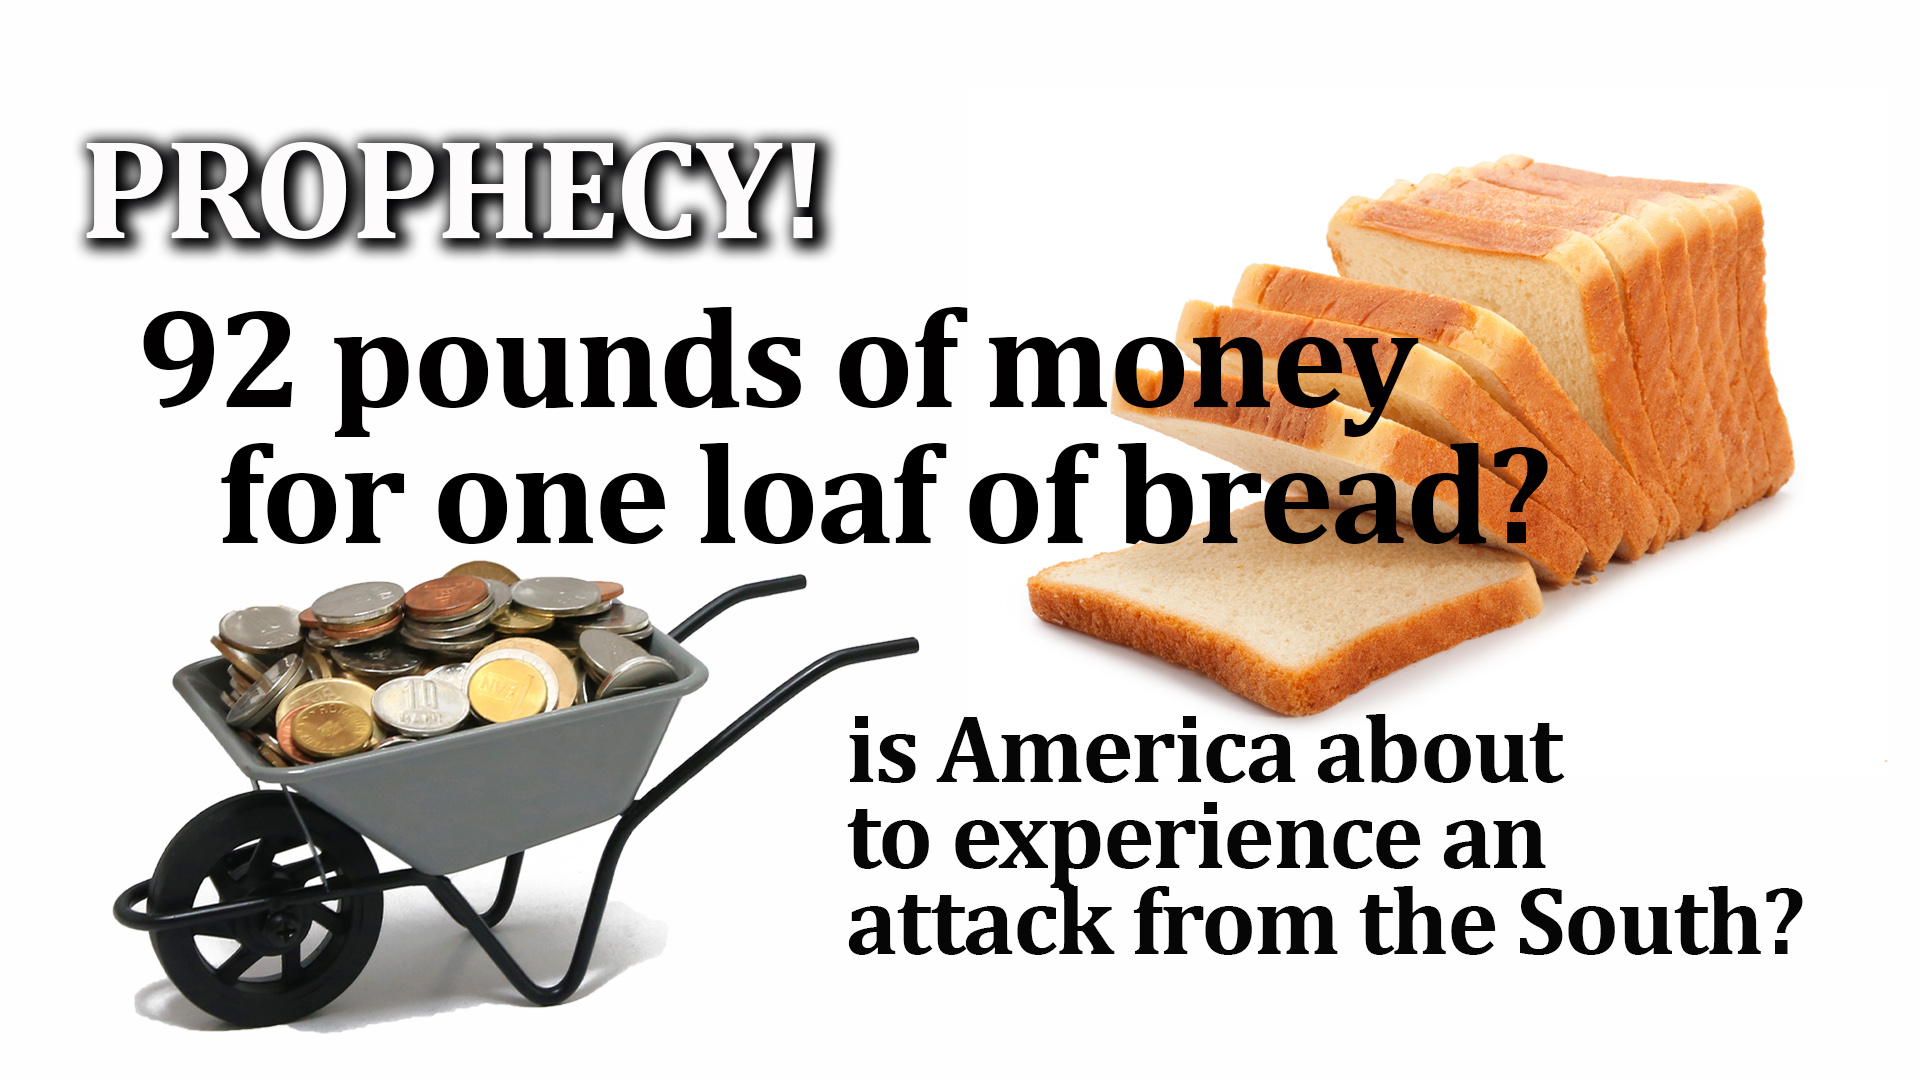 11-30-21 PROPHECY 92 pounds of money for bread attack from the south